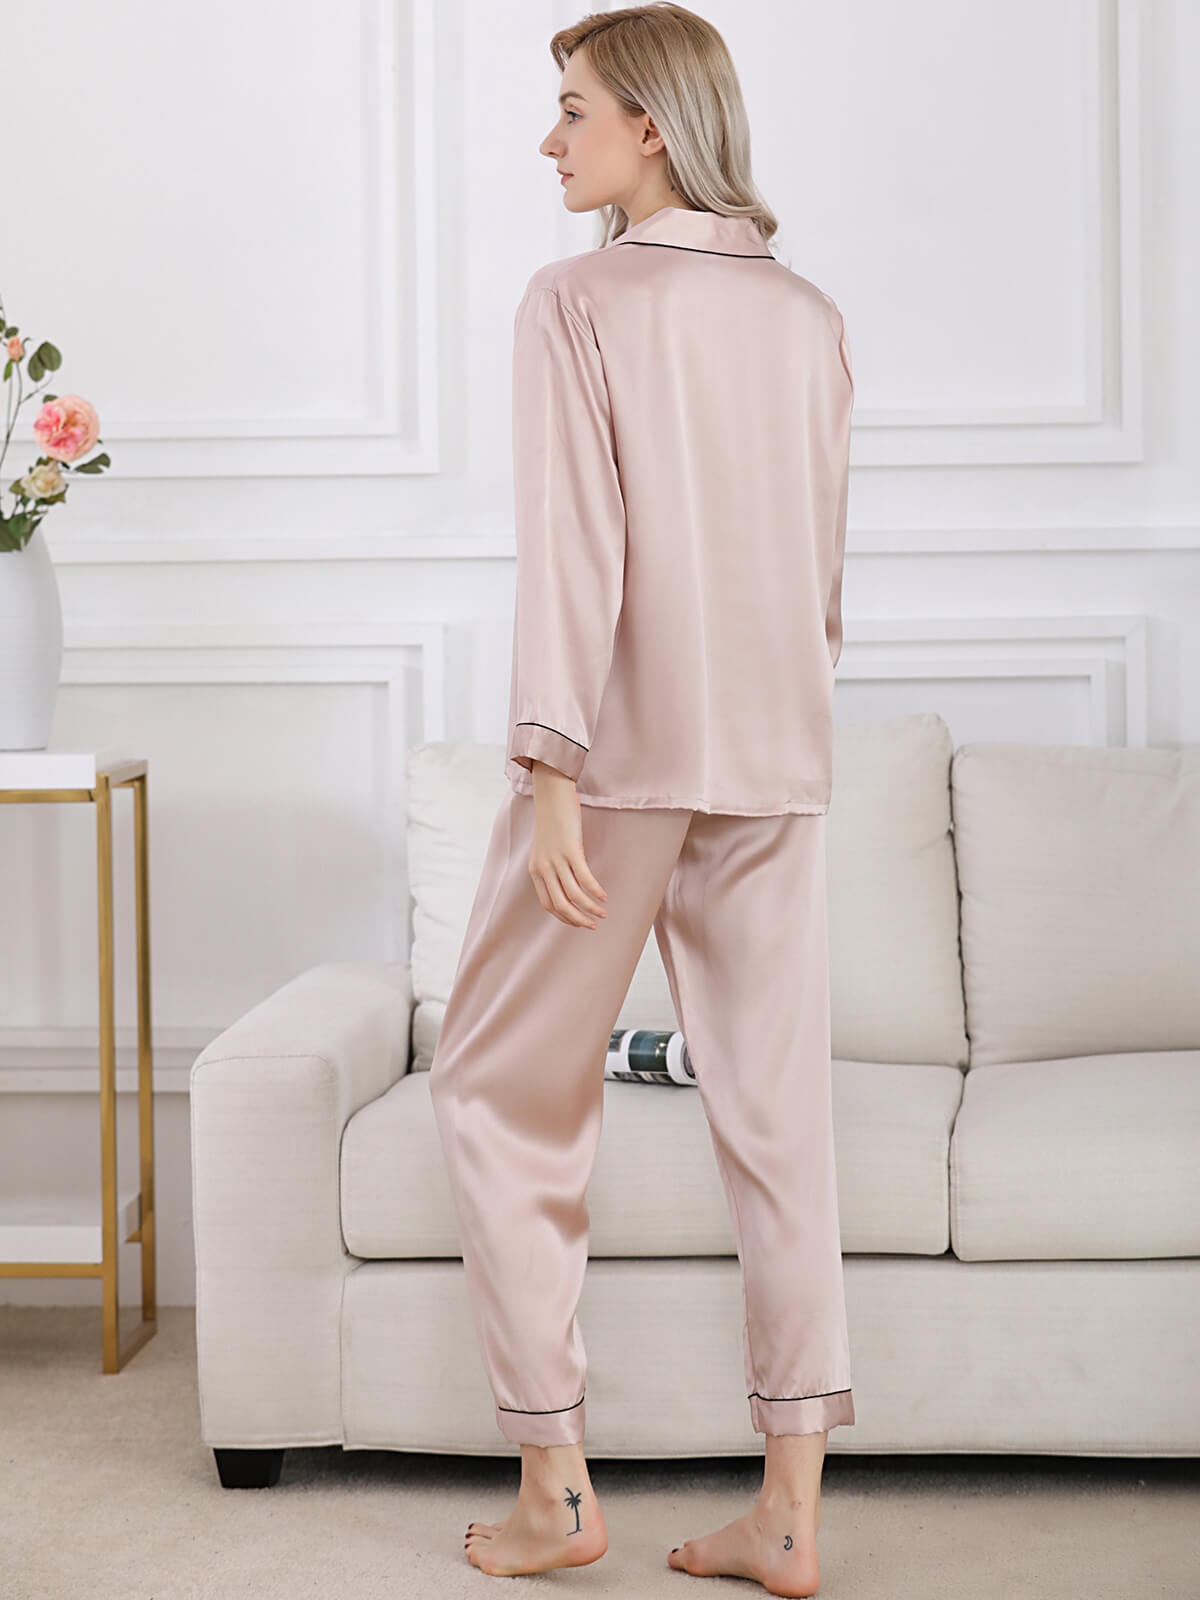 19 Momme Classic Trimmed Long Silk Pajama Set For Women [FS047] - $189.00 :  FreedomSilk, Best Silk Pillowcases, Silk Sheets, Silk Pajamas For Women,  Silk Nightgowns Online Store